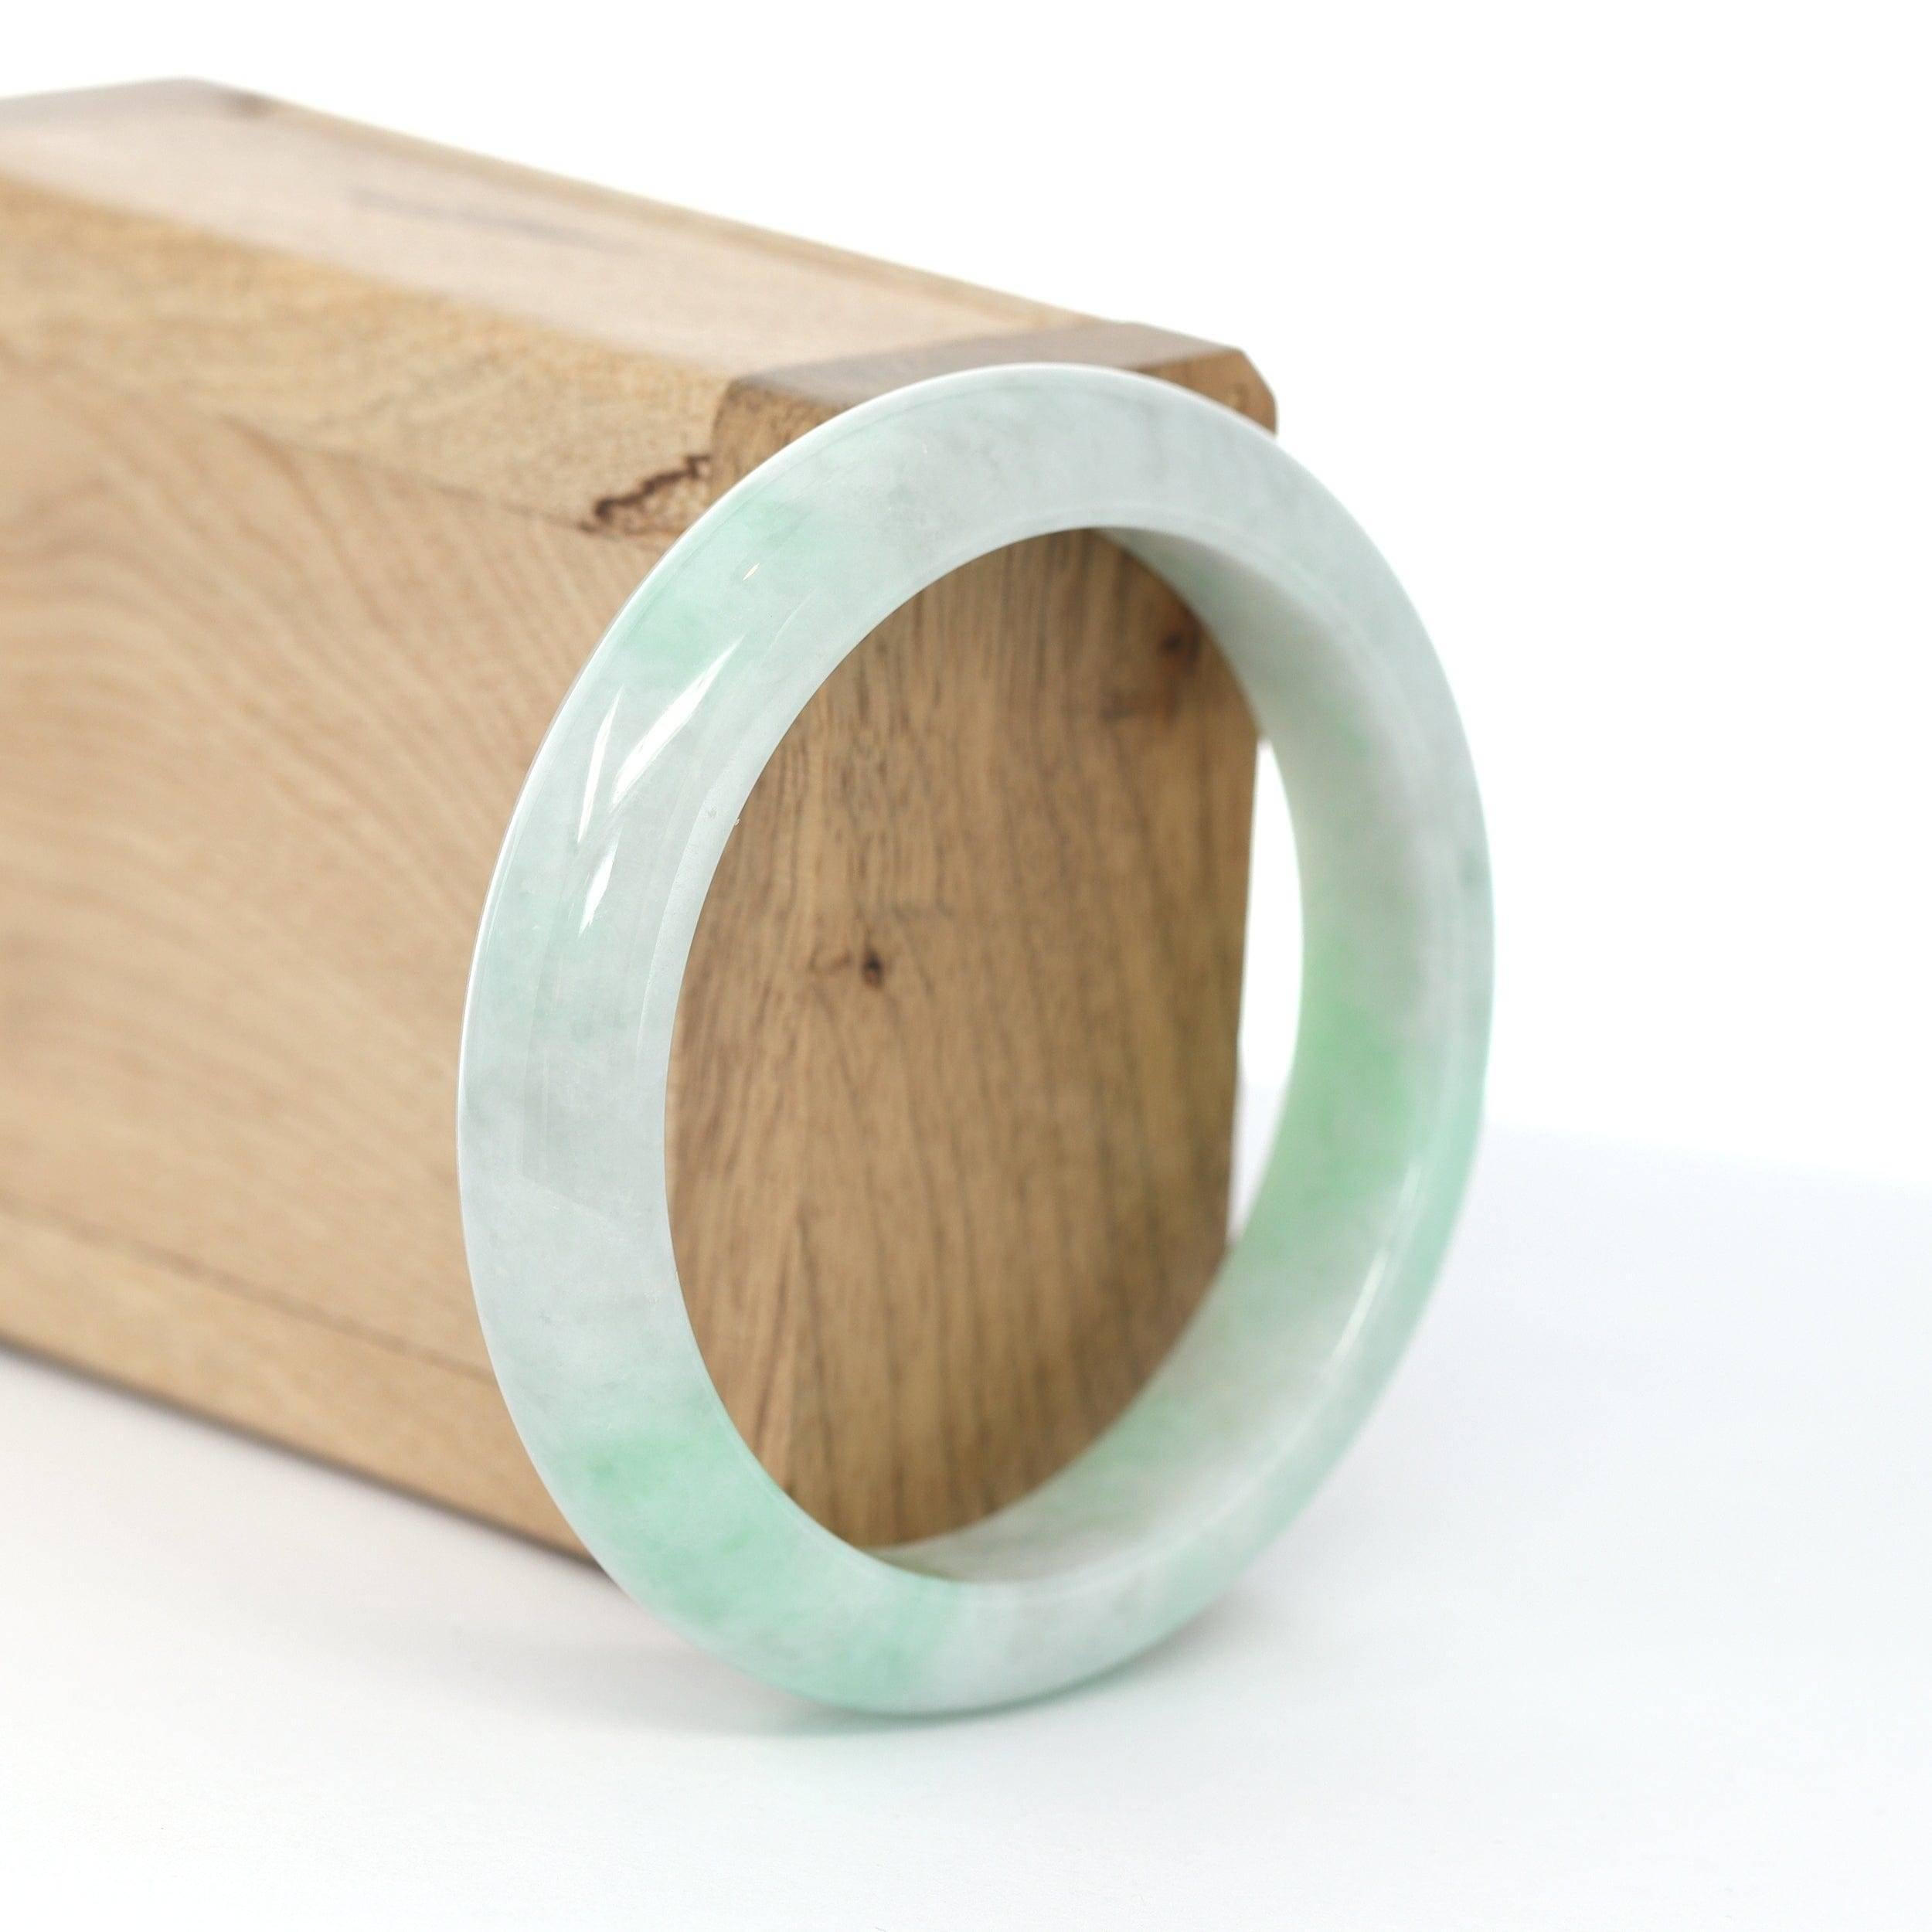 * DETAILS--- Genuine Burmese Jadeite Jade Bangle Bracelet. This bangle is made with fine genuine Burmese Jadeite jade. The jade texture is fine and smooth with nice green and lavender colors. It just has little clouds and a little natural stone